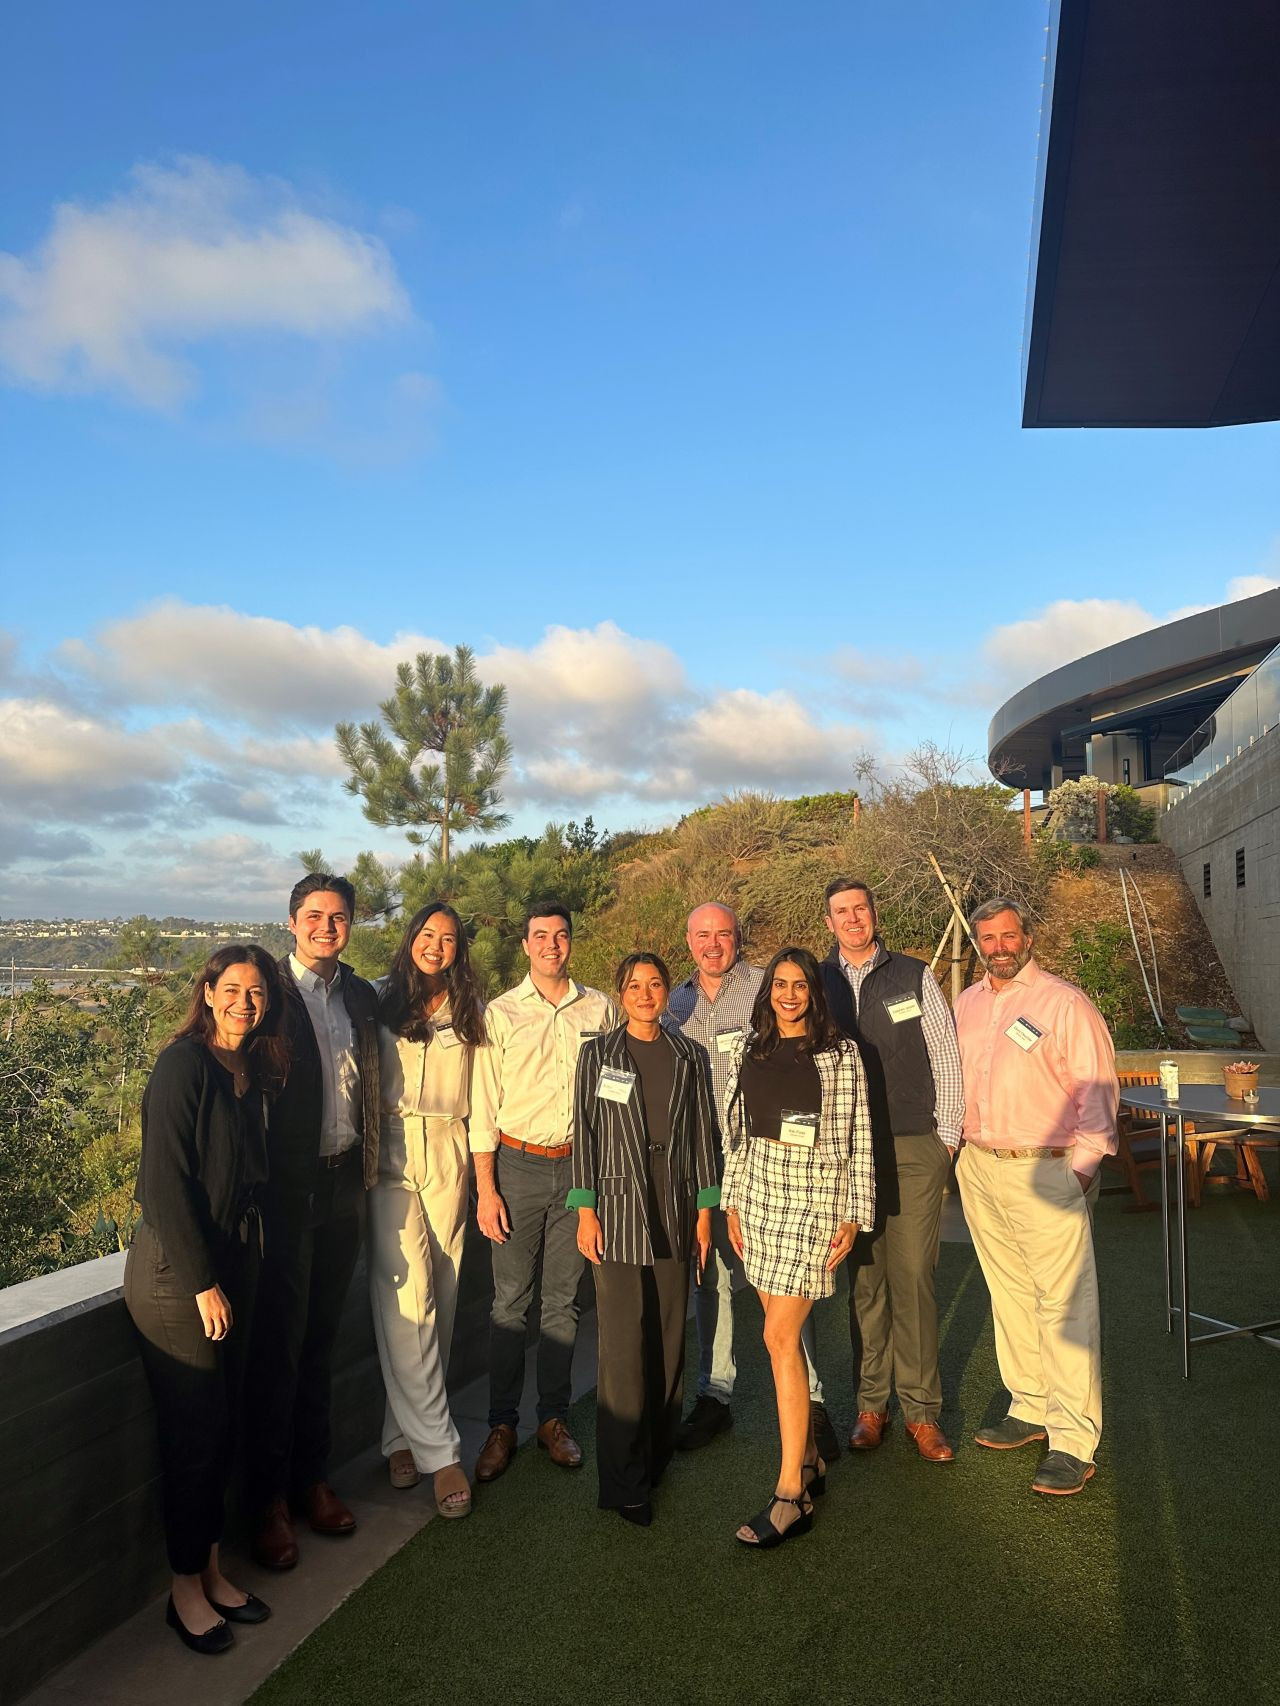 The Gilmartin team hosted a networking event to connect with executives in the space.